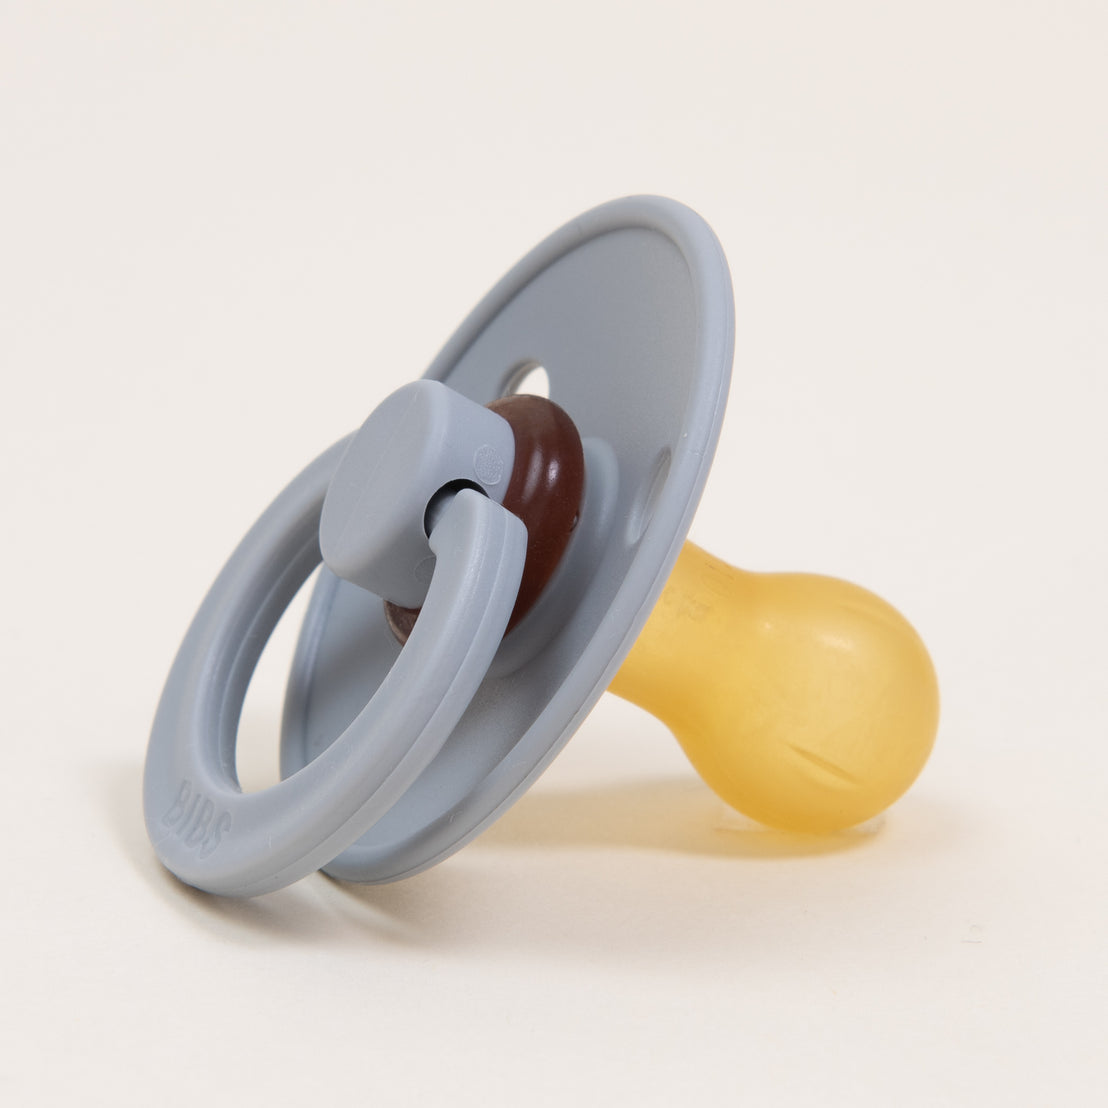 A Bibs Pacifier in Cloud with a yellow nipple, resting on a neutral background.